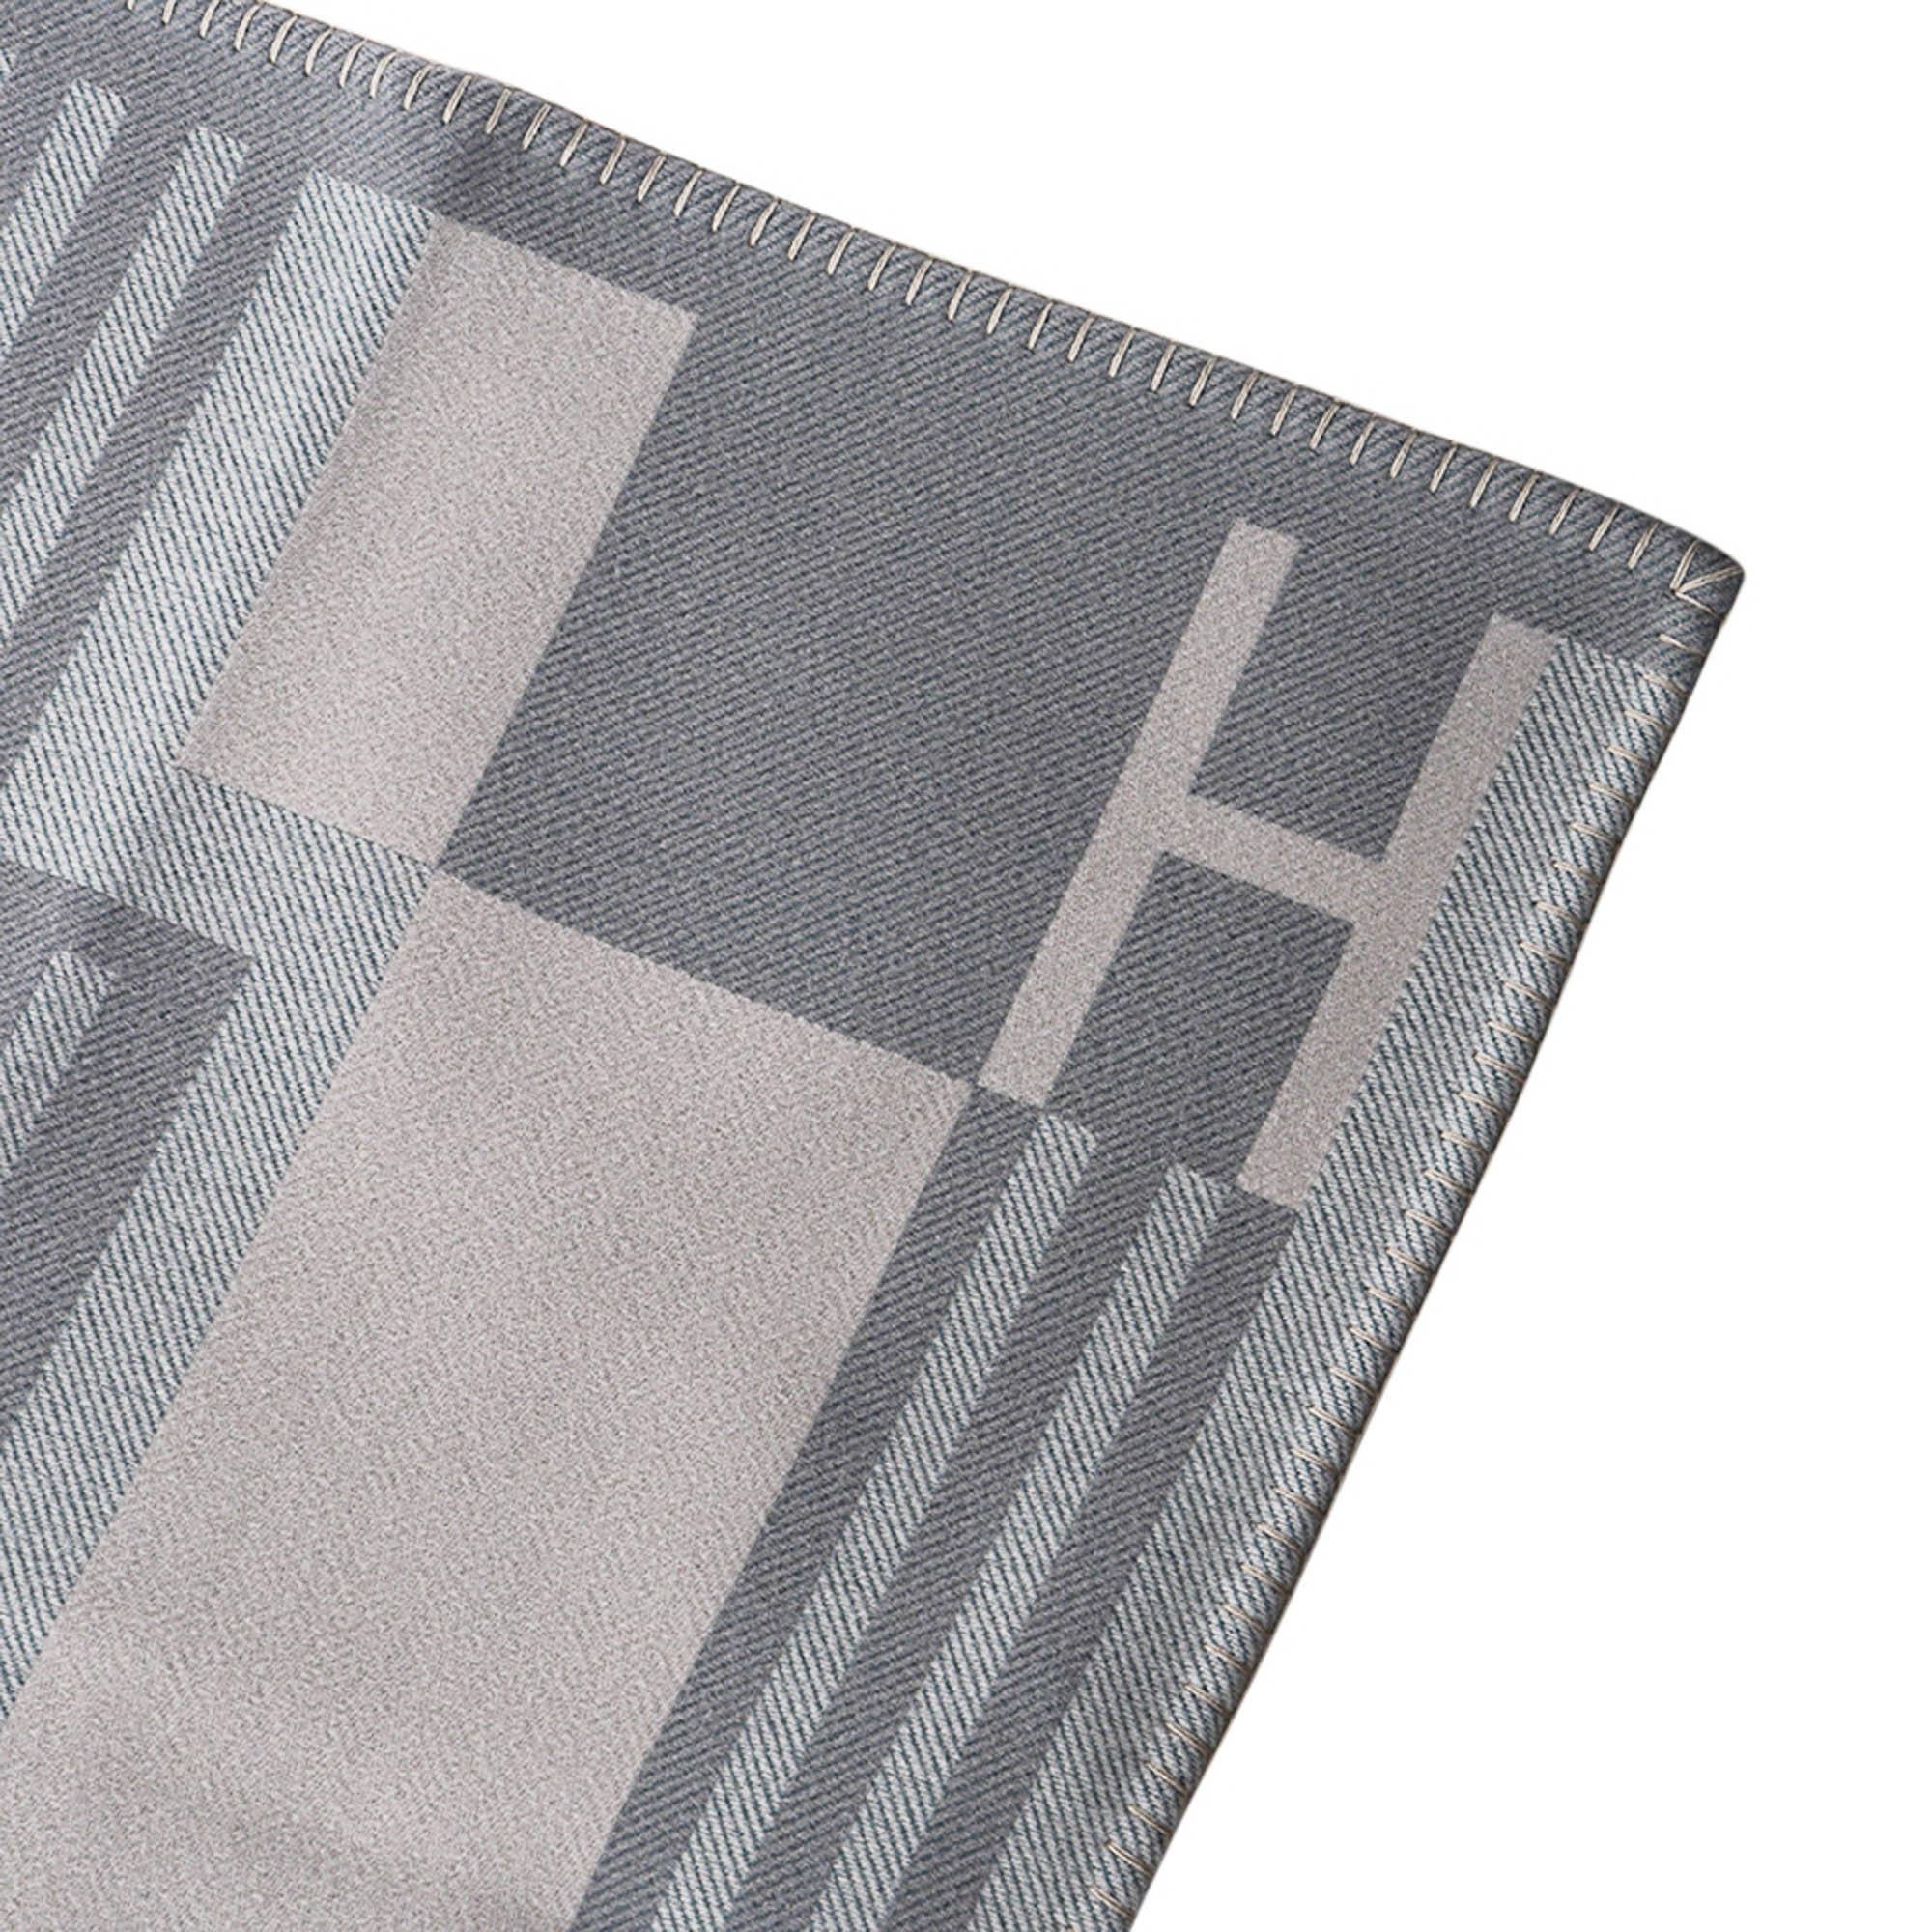 Hermes Ithaque Blanket Gris Perle Wool and Cashmere For Sale 1